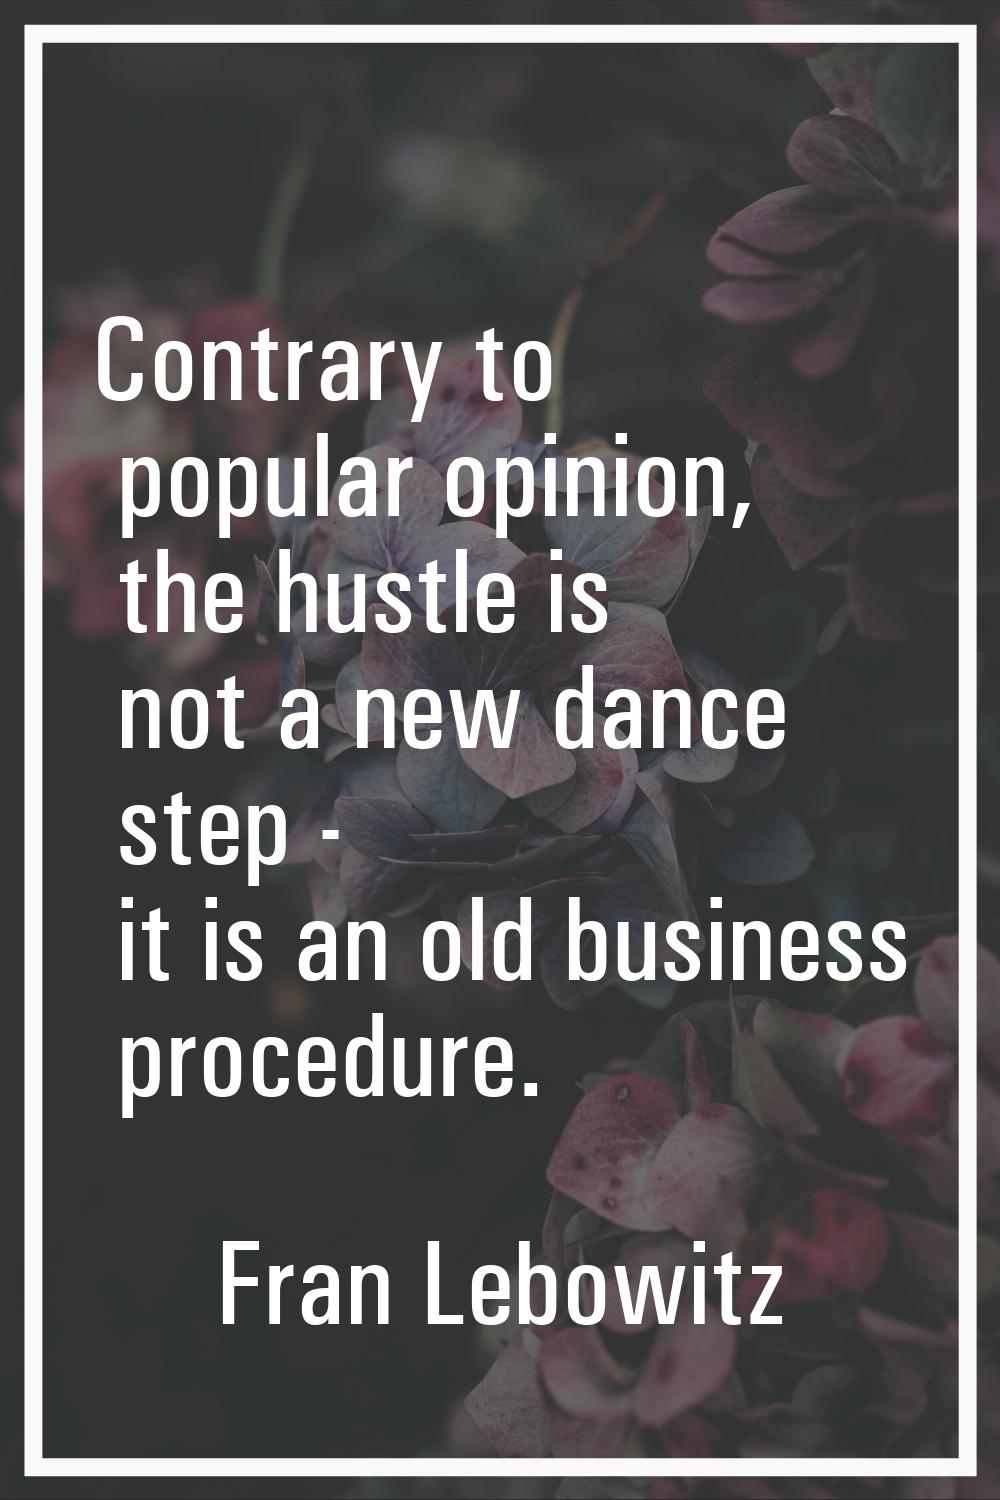 Contrary to popular opinion, the hustle is not a new dance step - it is an old business procedure.